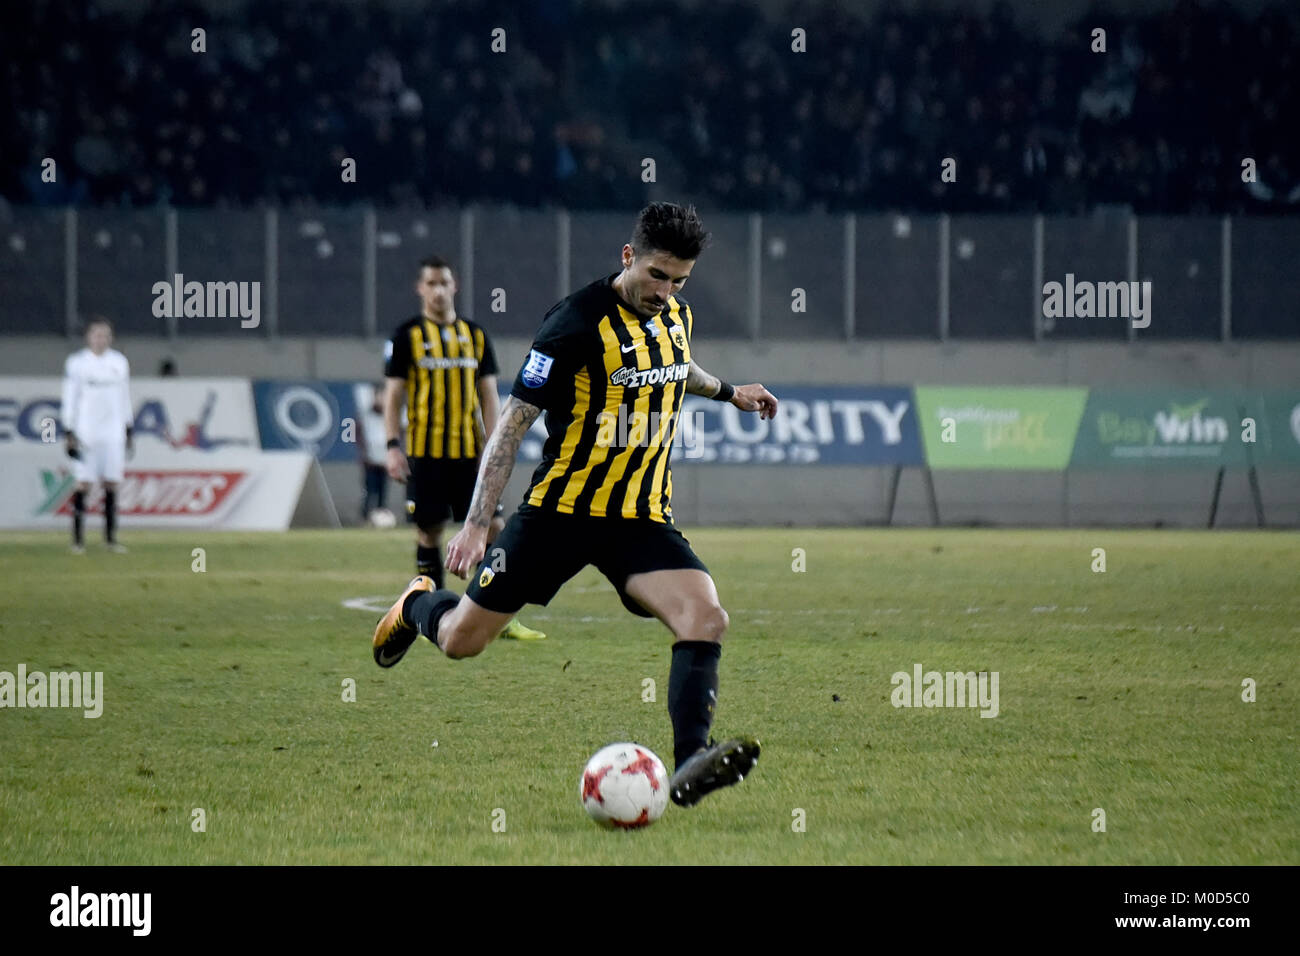 Larissa, Greece. 20th Jan, 2018. AEK FC midfielder Panagiotis Kone in action, during a Greek Superleague soccer match at the Greek city of Larissa between AEL FC and AEK FC. The result of the match was 0-0. Credit: Giannis Papanikos/ZUMA Wire/Alamy Live News Stock Photo